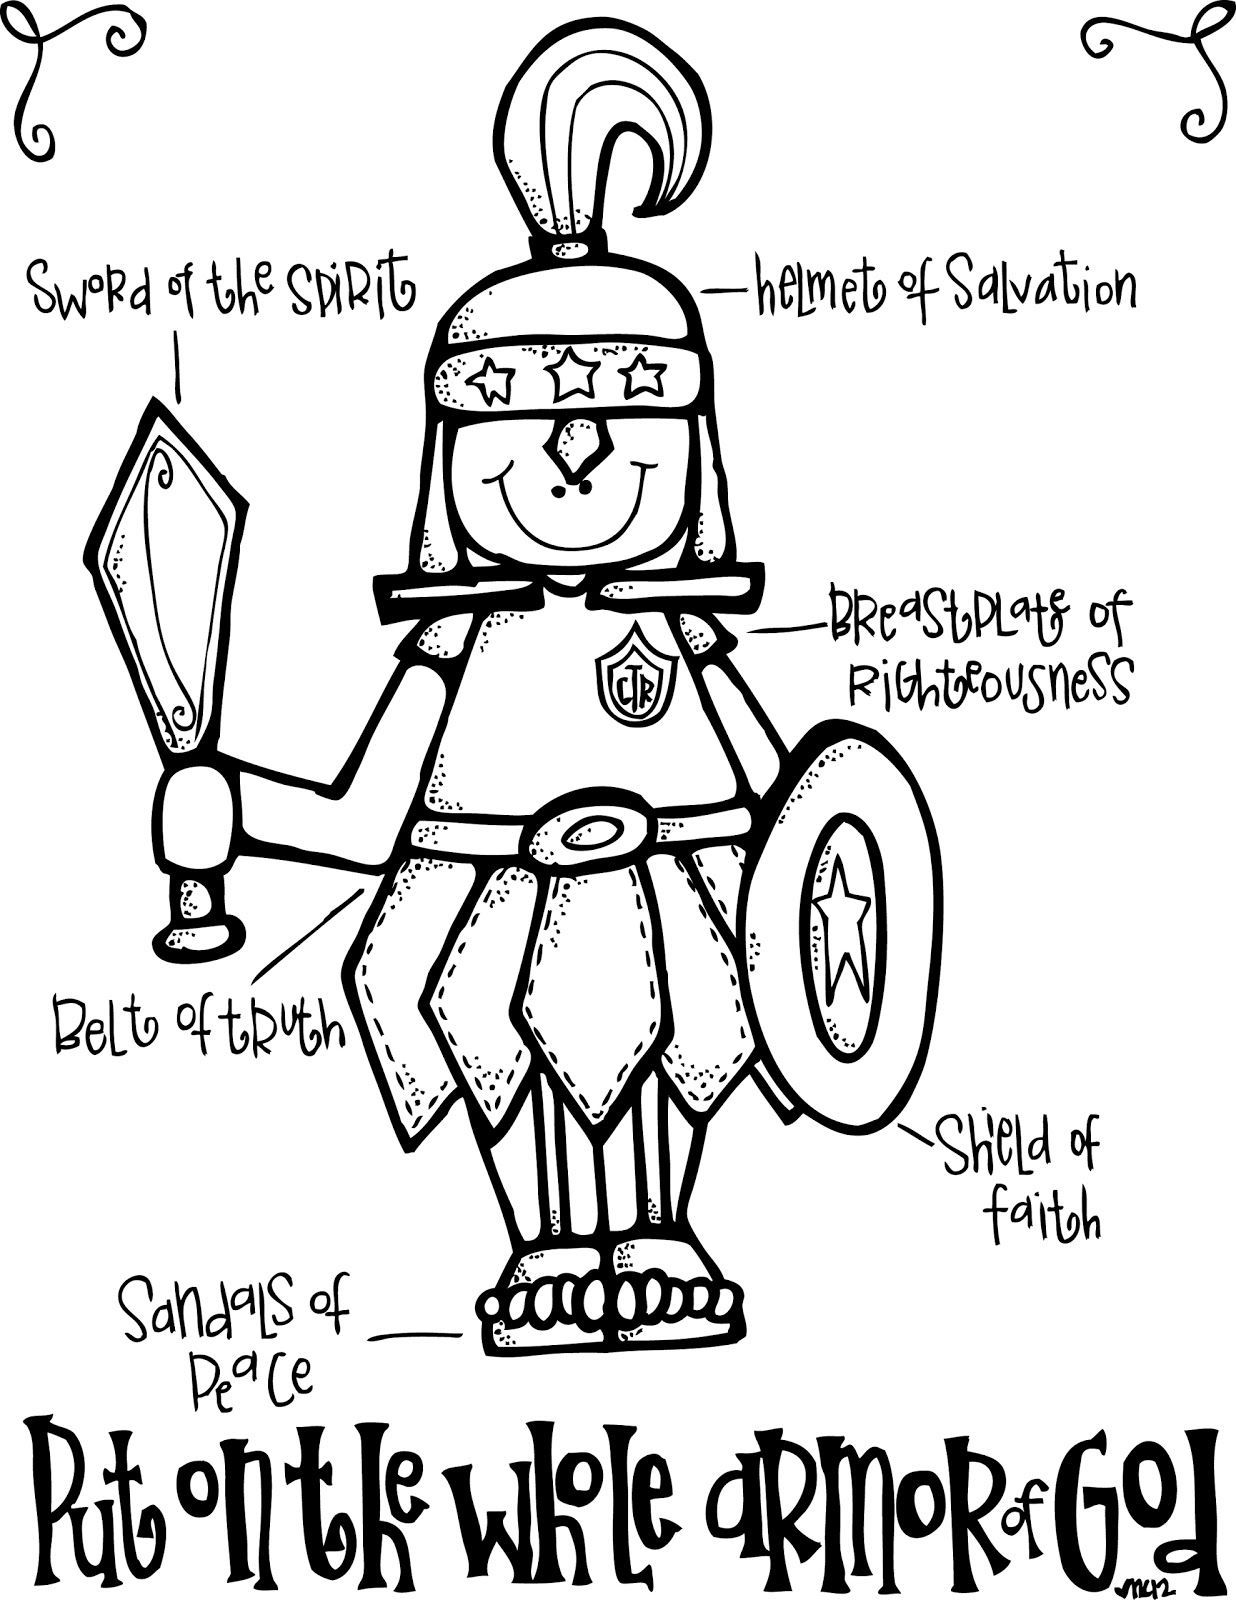 armor-of-god-coloring-pages-at-getcolorings-free-printable-colorings-pages-to-print-and-color